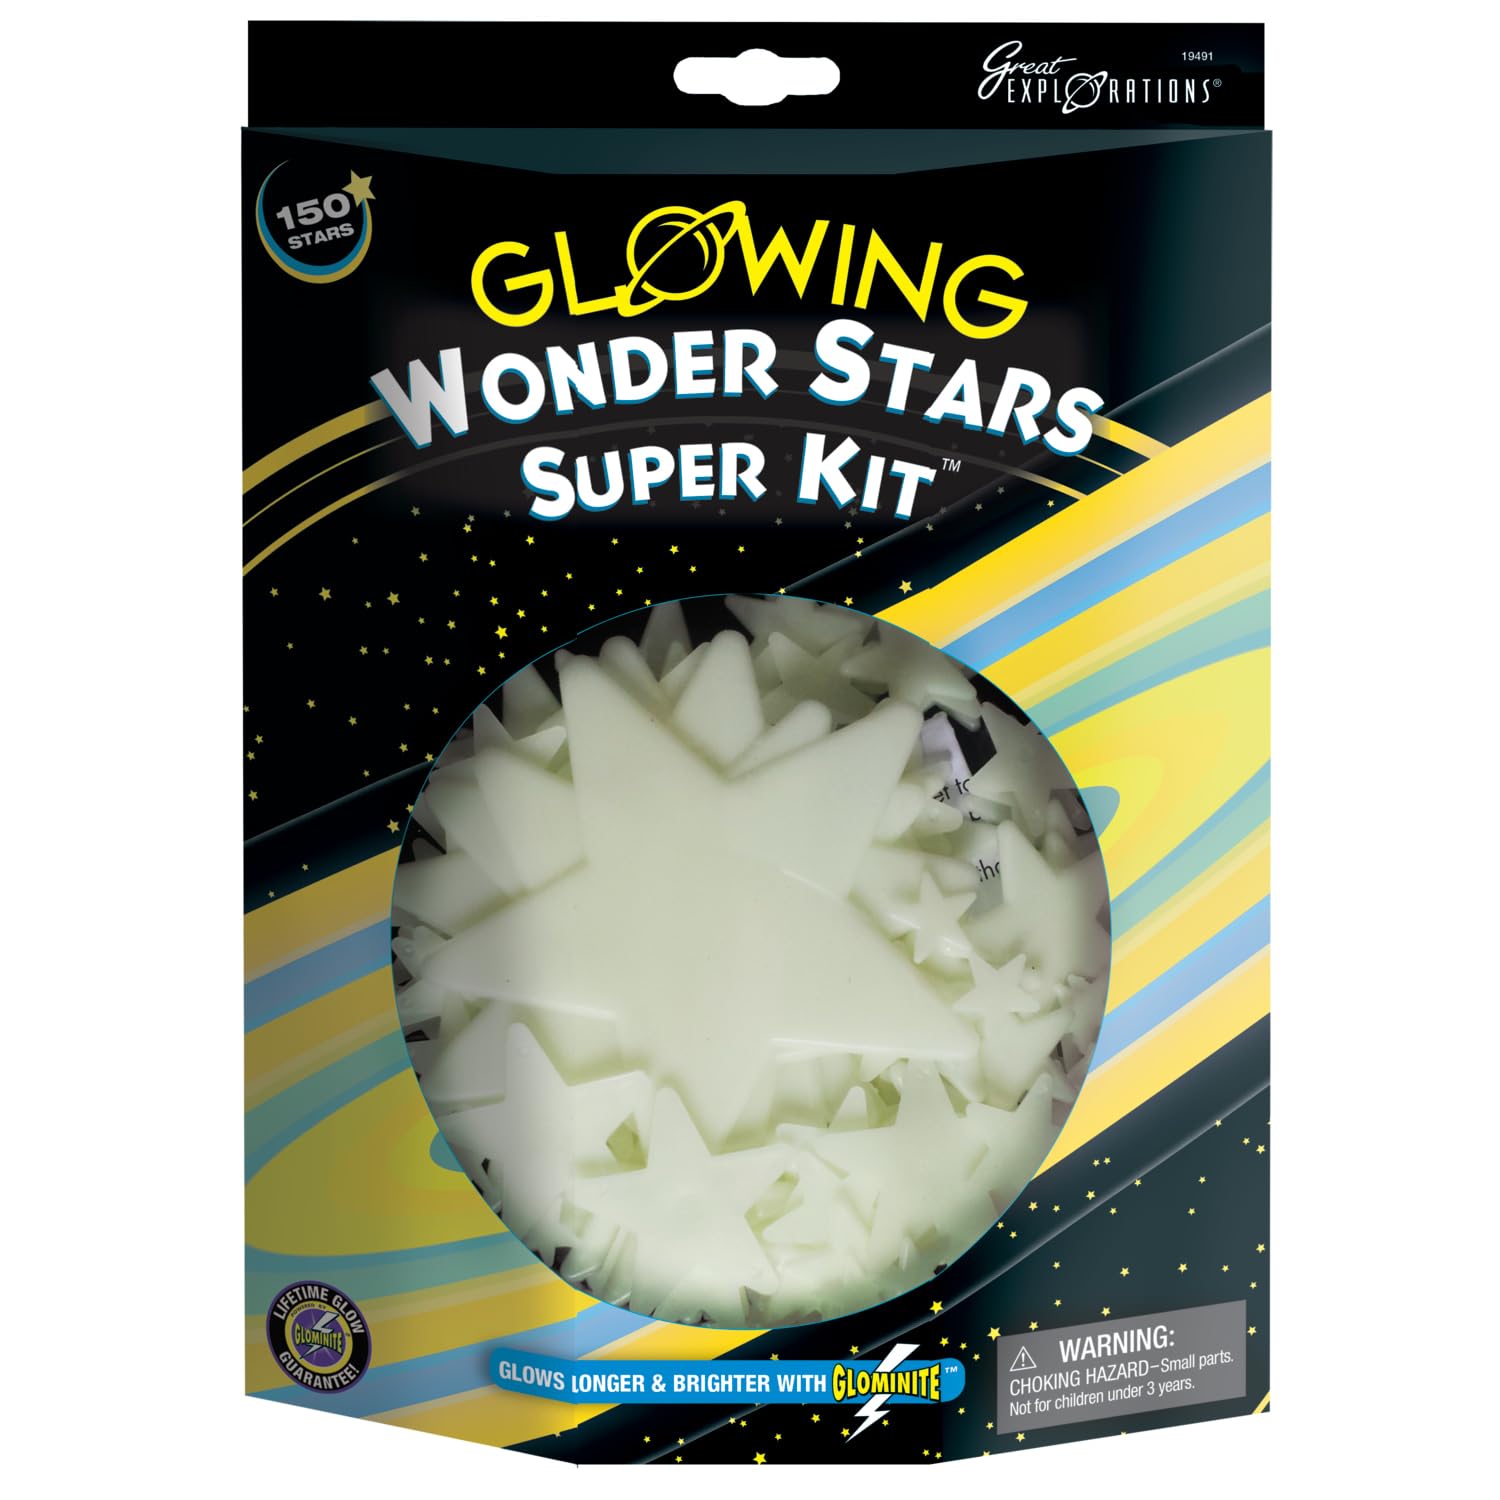 Great Explorations | Wonder Stars Super Kit Glow In The Dark Ceiling Stars 150Piece In 4 Sizes Reusable Adhesive Putty & Constellation Star Map Lifetime Glow Guarantee Green